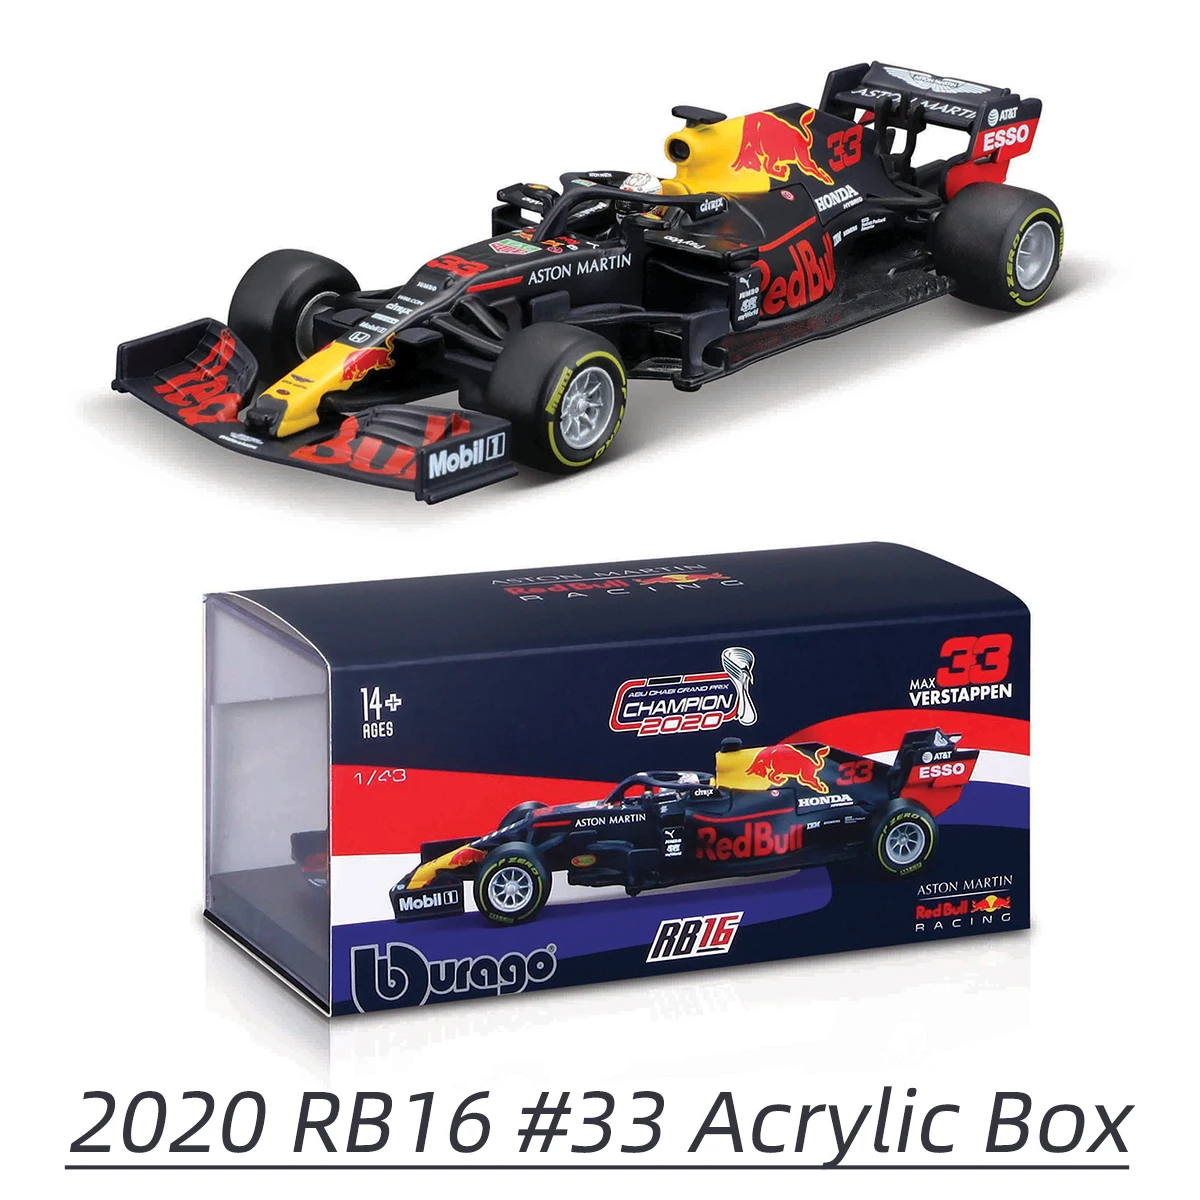 

Bburago 1:43 2020 RedBell RB16 #33 F1 Formula Car Static Die Cast Vehicles Collectible Model Racing Car Toys